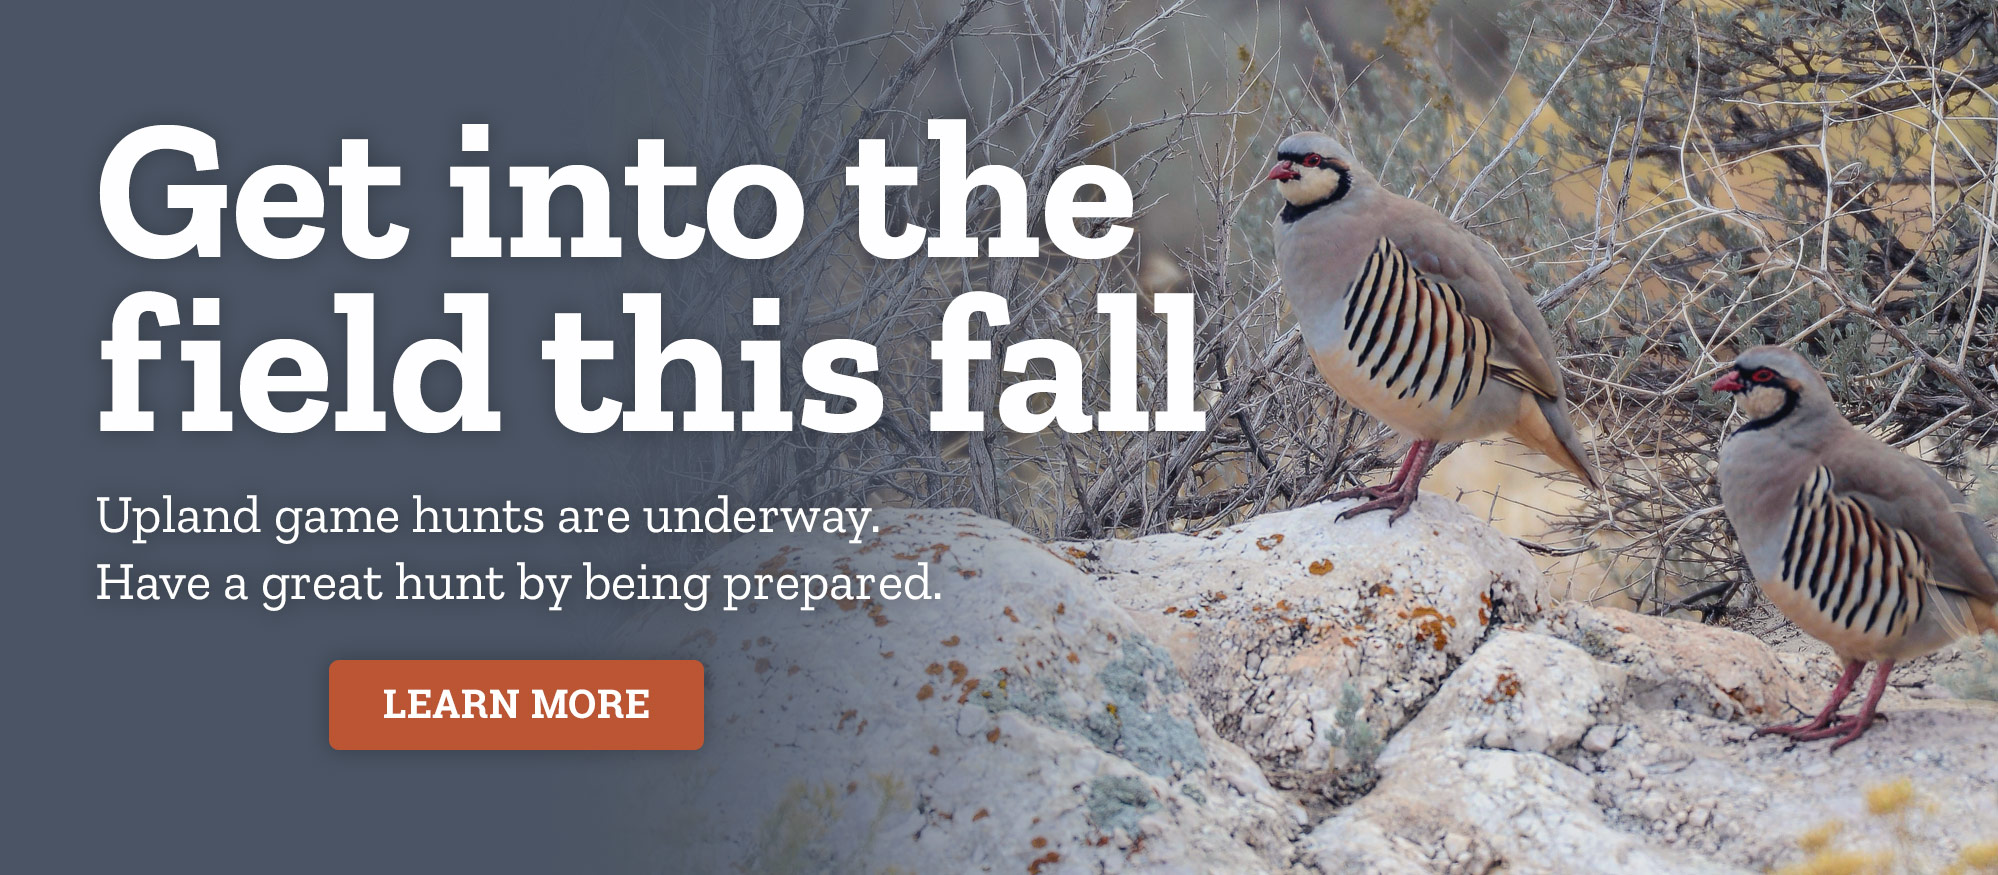 Upland game hunts are underway. Have a great hunt by being prepared.